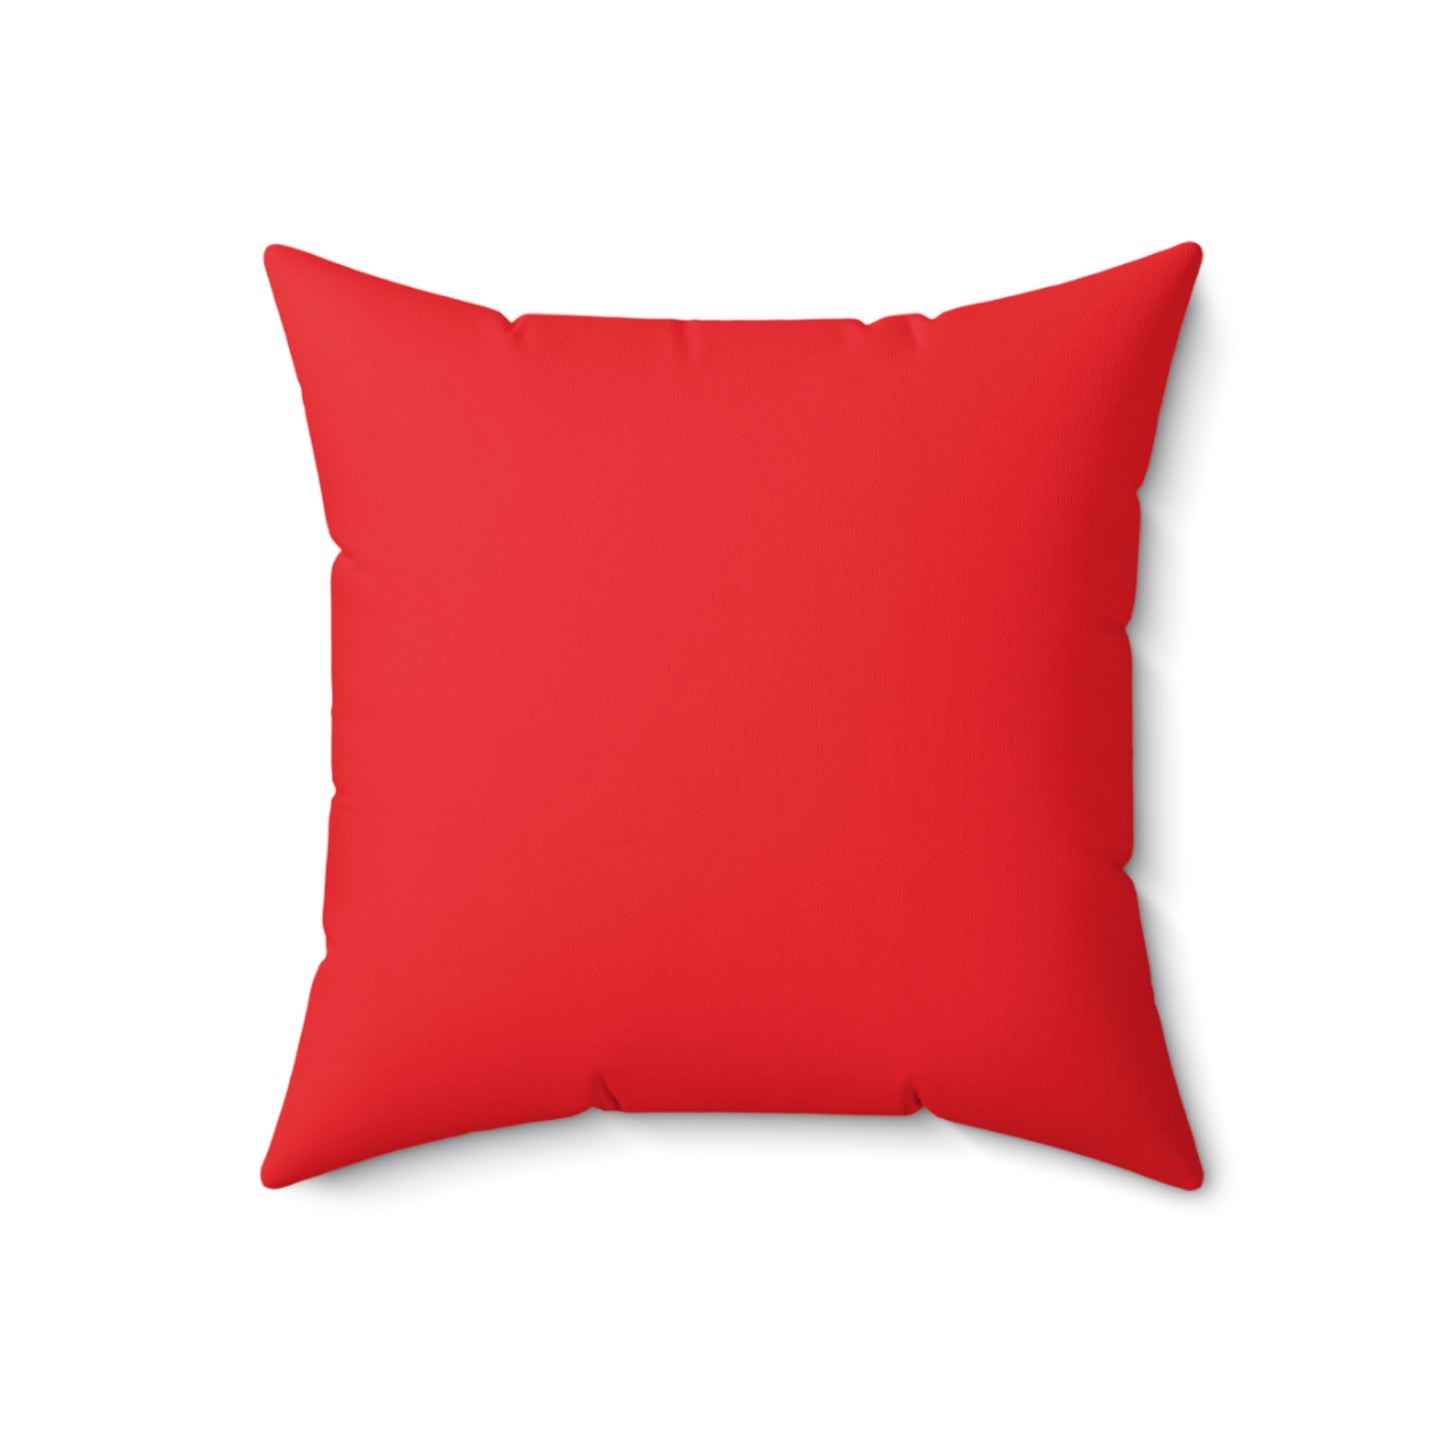 Polyester Square Pillow- Old Trafford Design